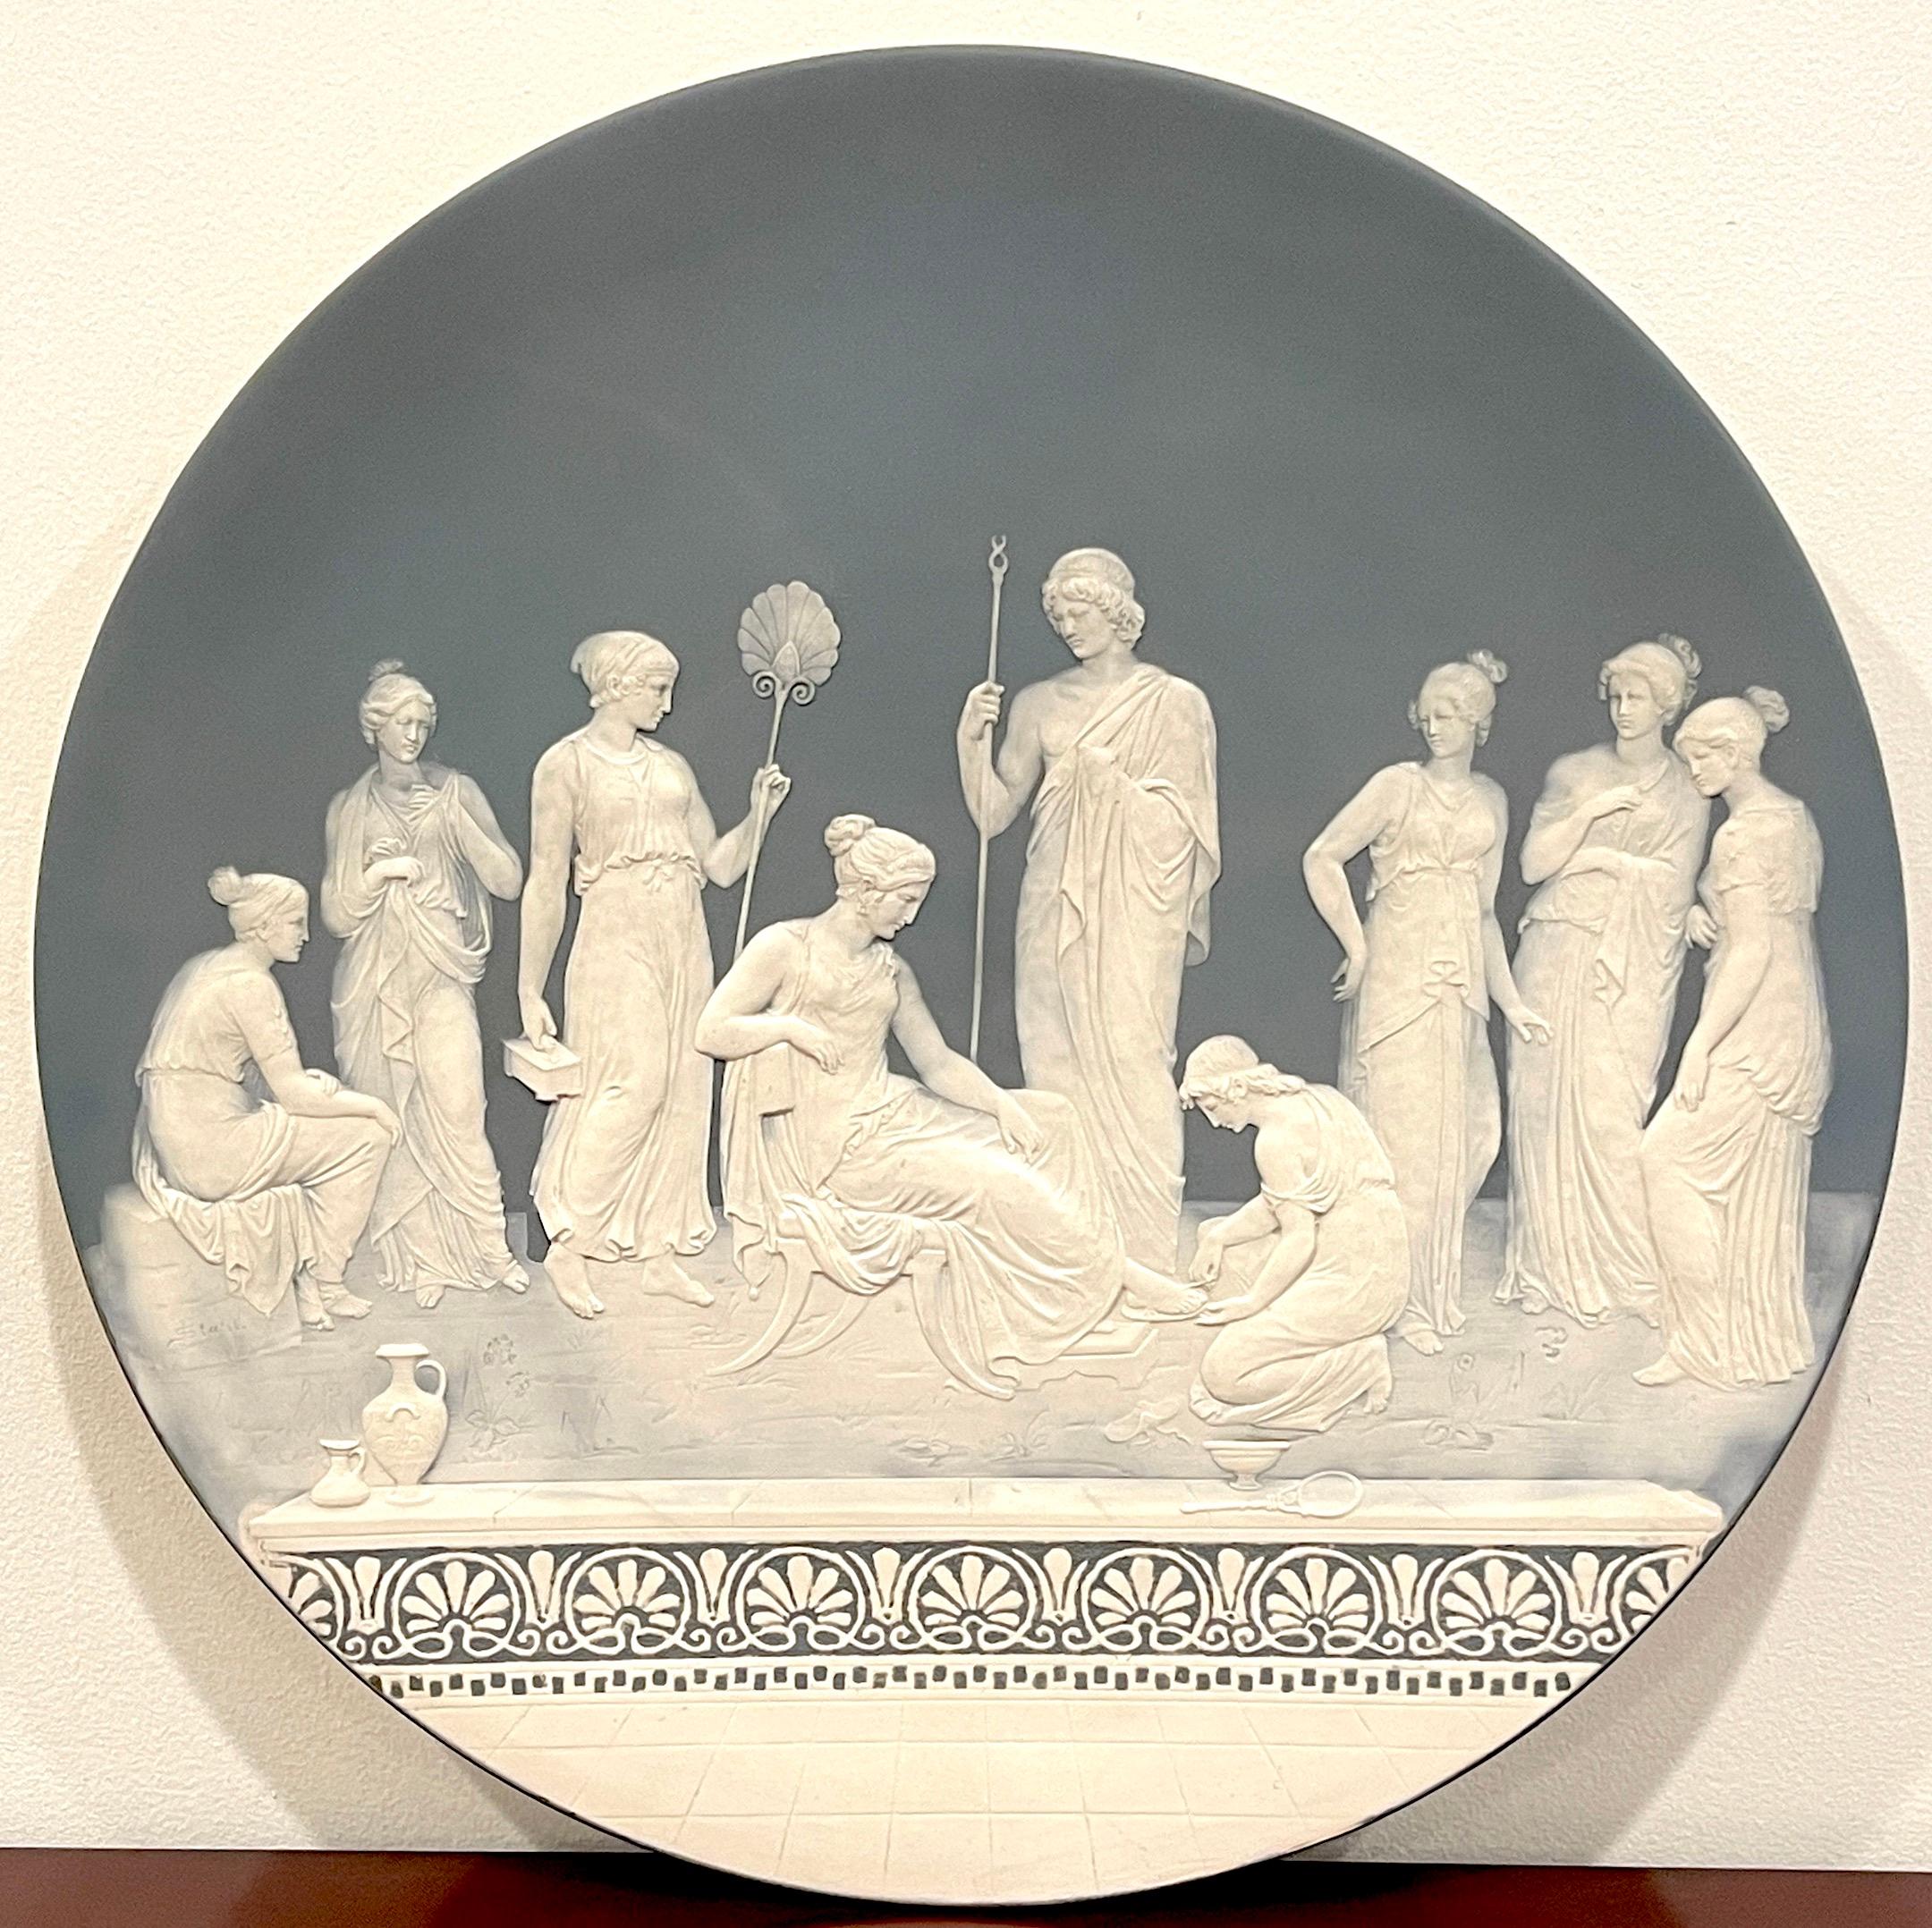 Jean Baptist Stahl Pate-sur-Pate/ Phanolith neoclassical court scene charger 
Germany, circa 1899
An exceptional large pâte-sur-pâte/ phanolith Neoclassical nine draped figures in a highly detailed decorated court scene.
The decoration is